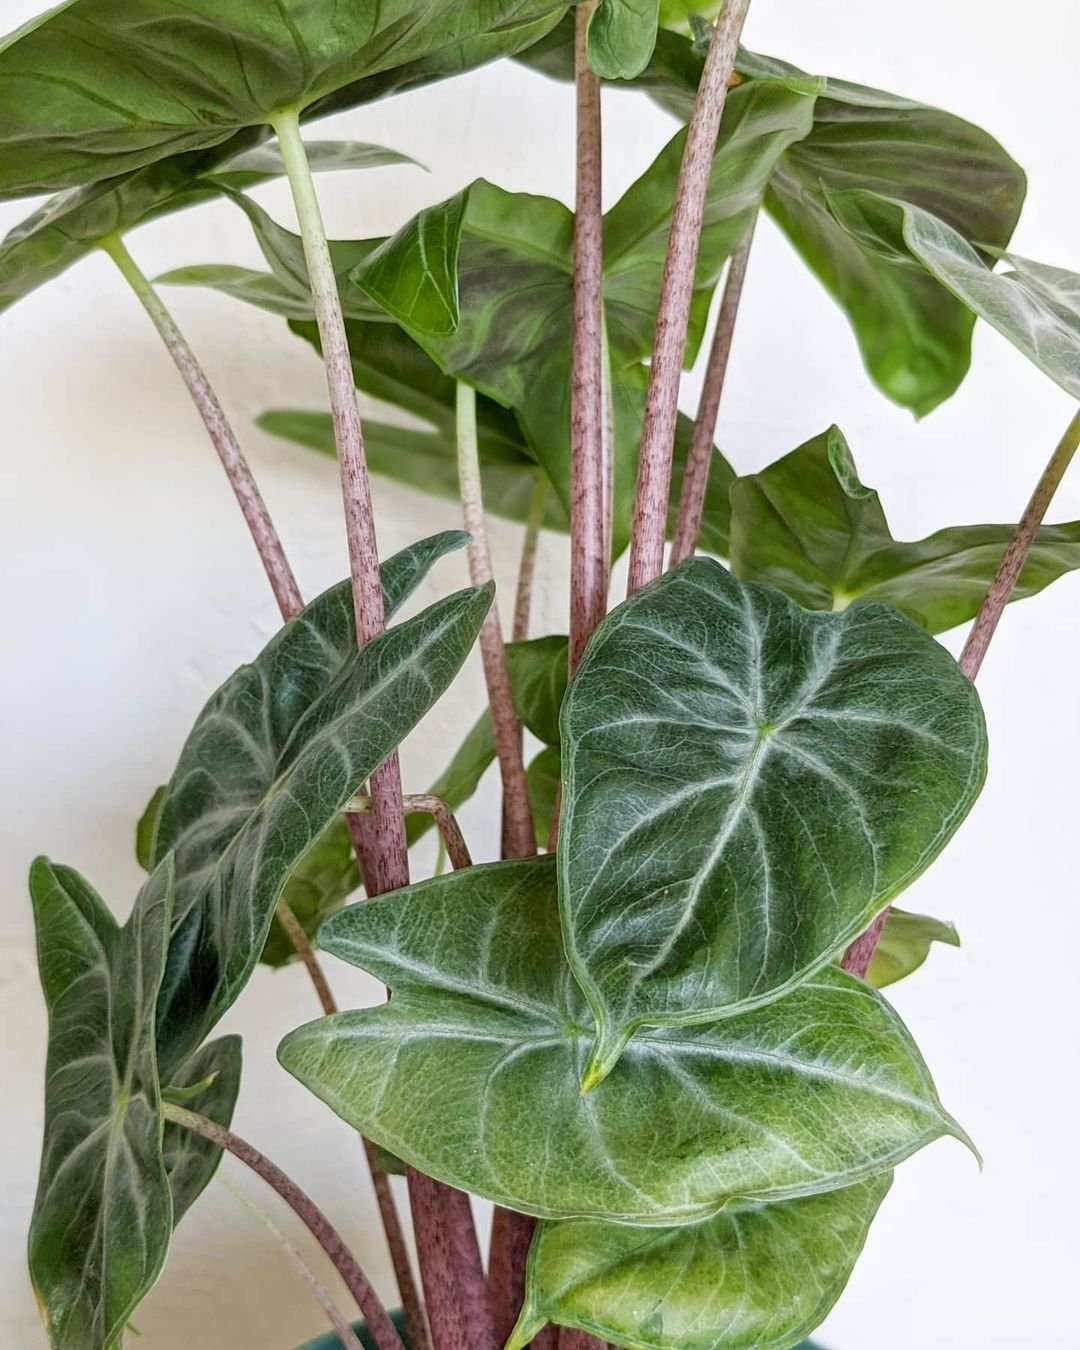 Alocasia Ivory Coast plant with large, heart-shaped leaves and white veins, sitting in a decorative pot.